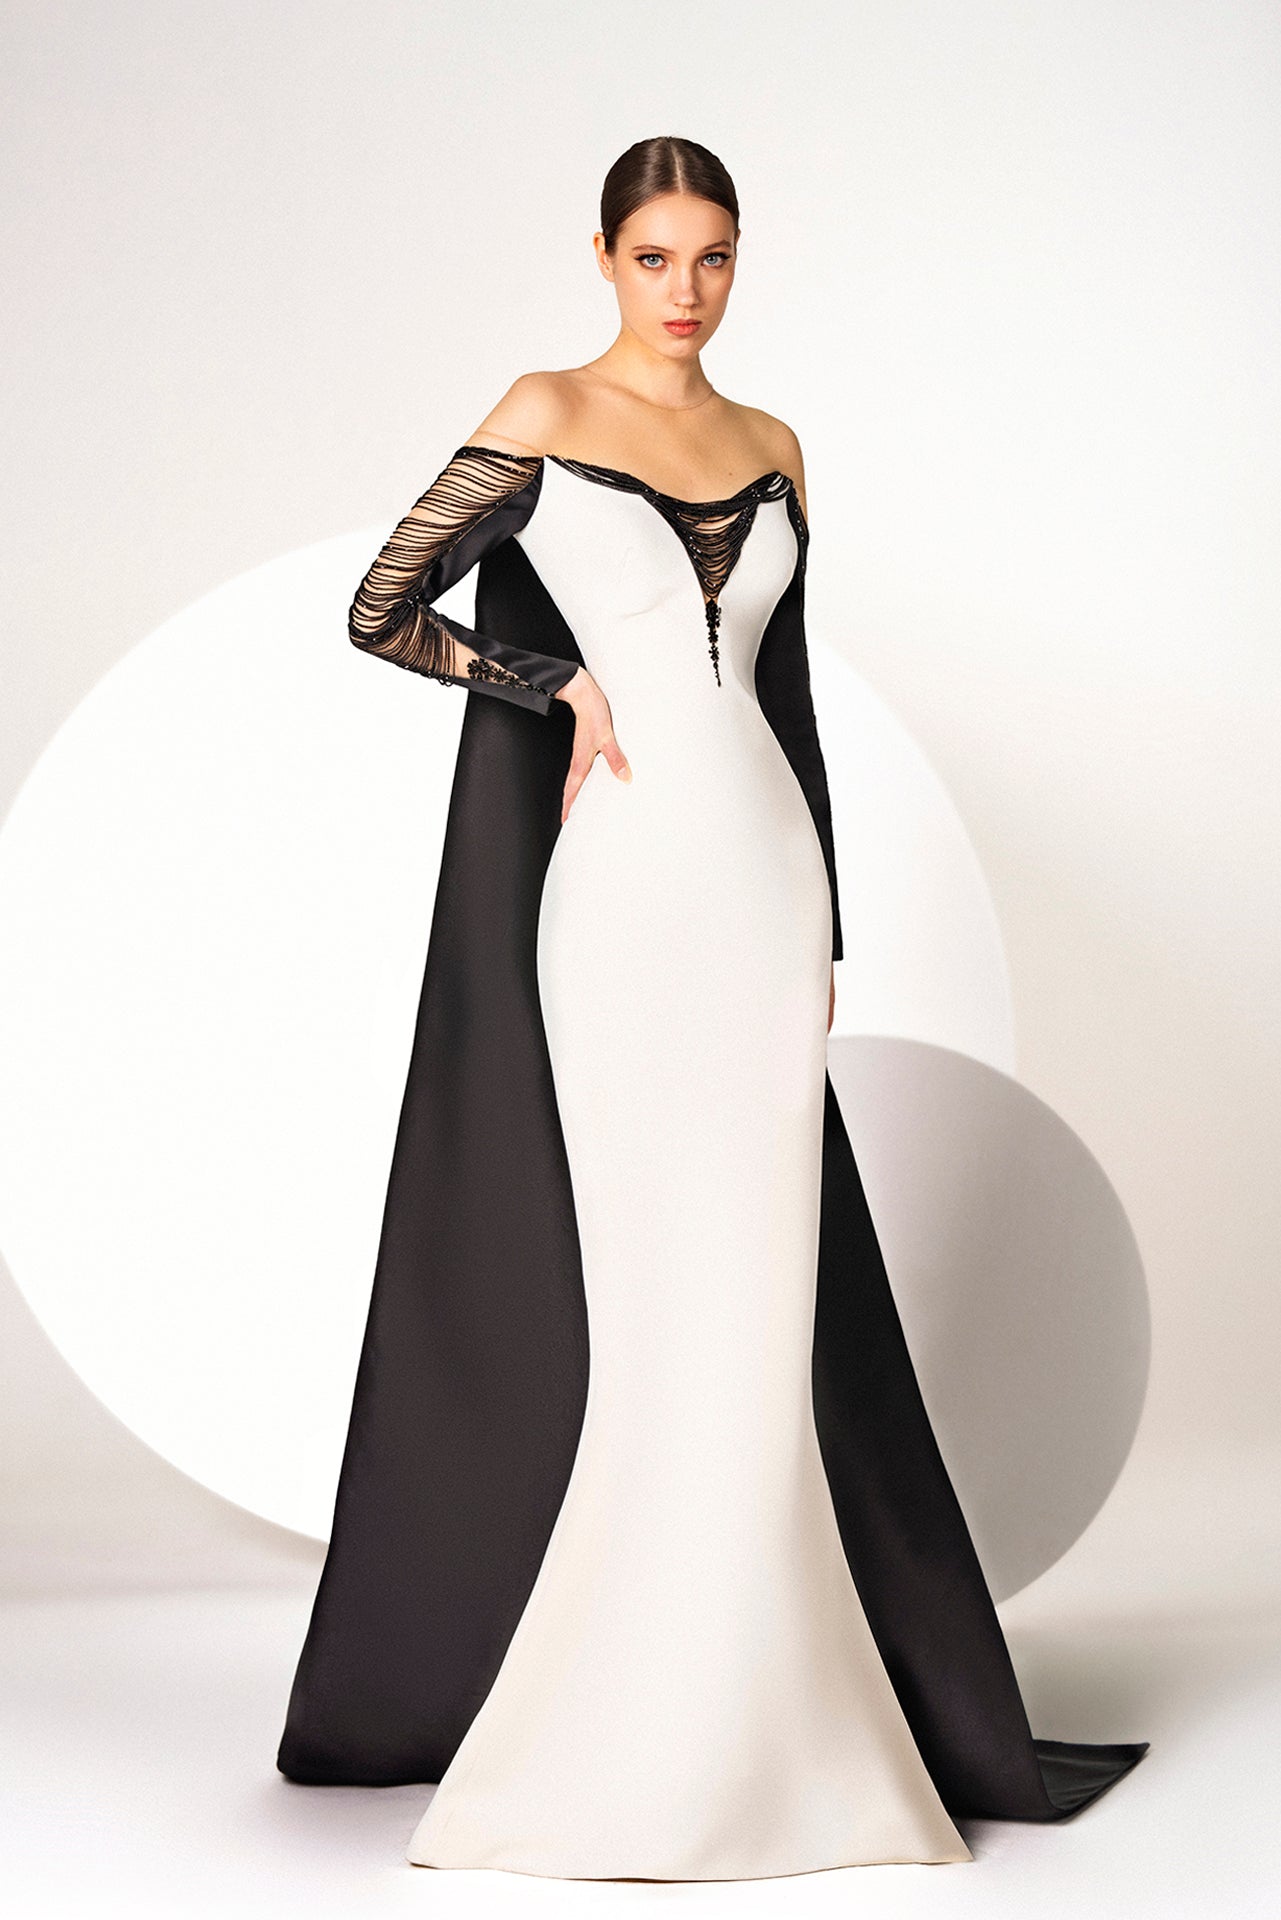 Off-Shoulder Black-and-White Mermaid Dress Cascading Fringes & Black Silenus on The Neckline and Sleeves